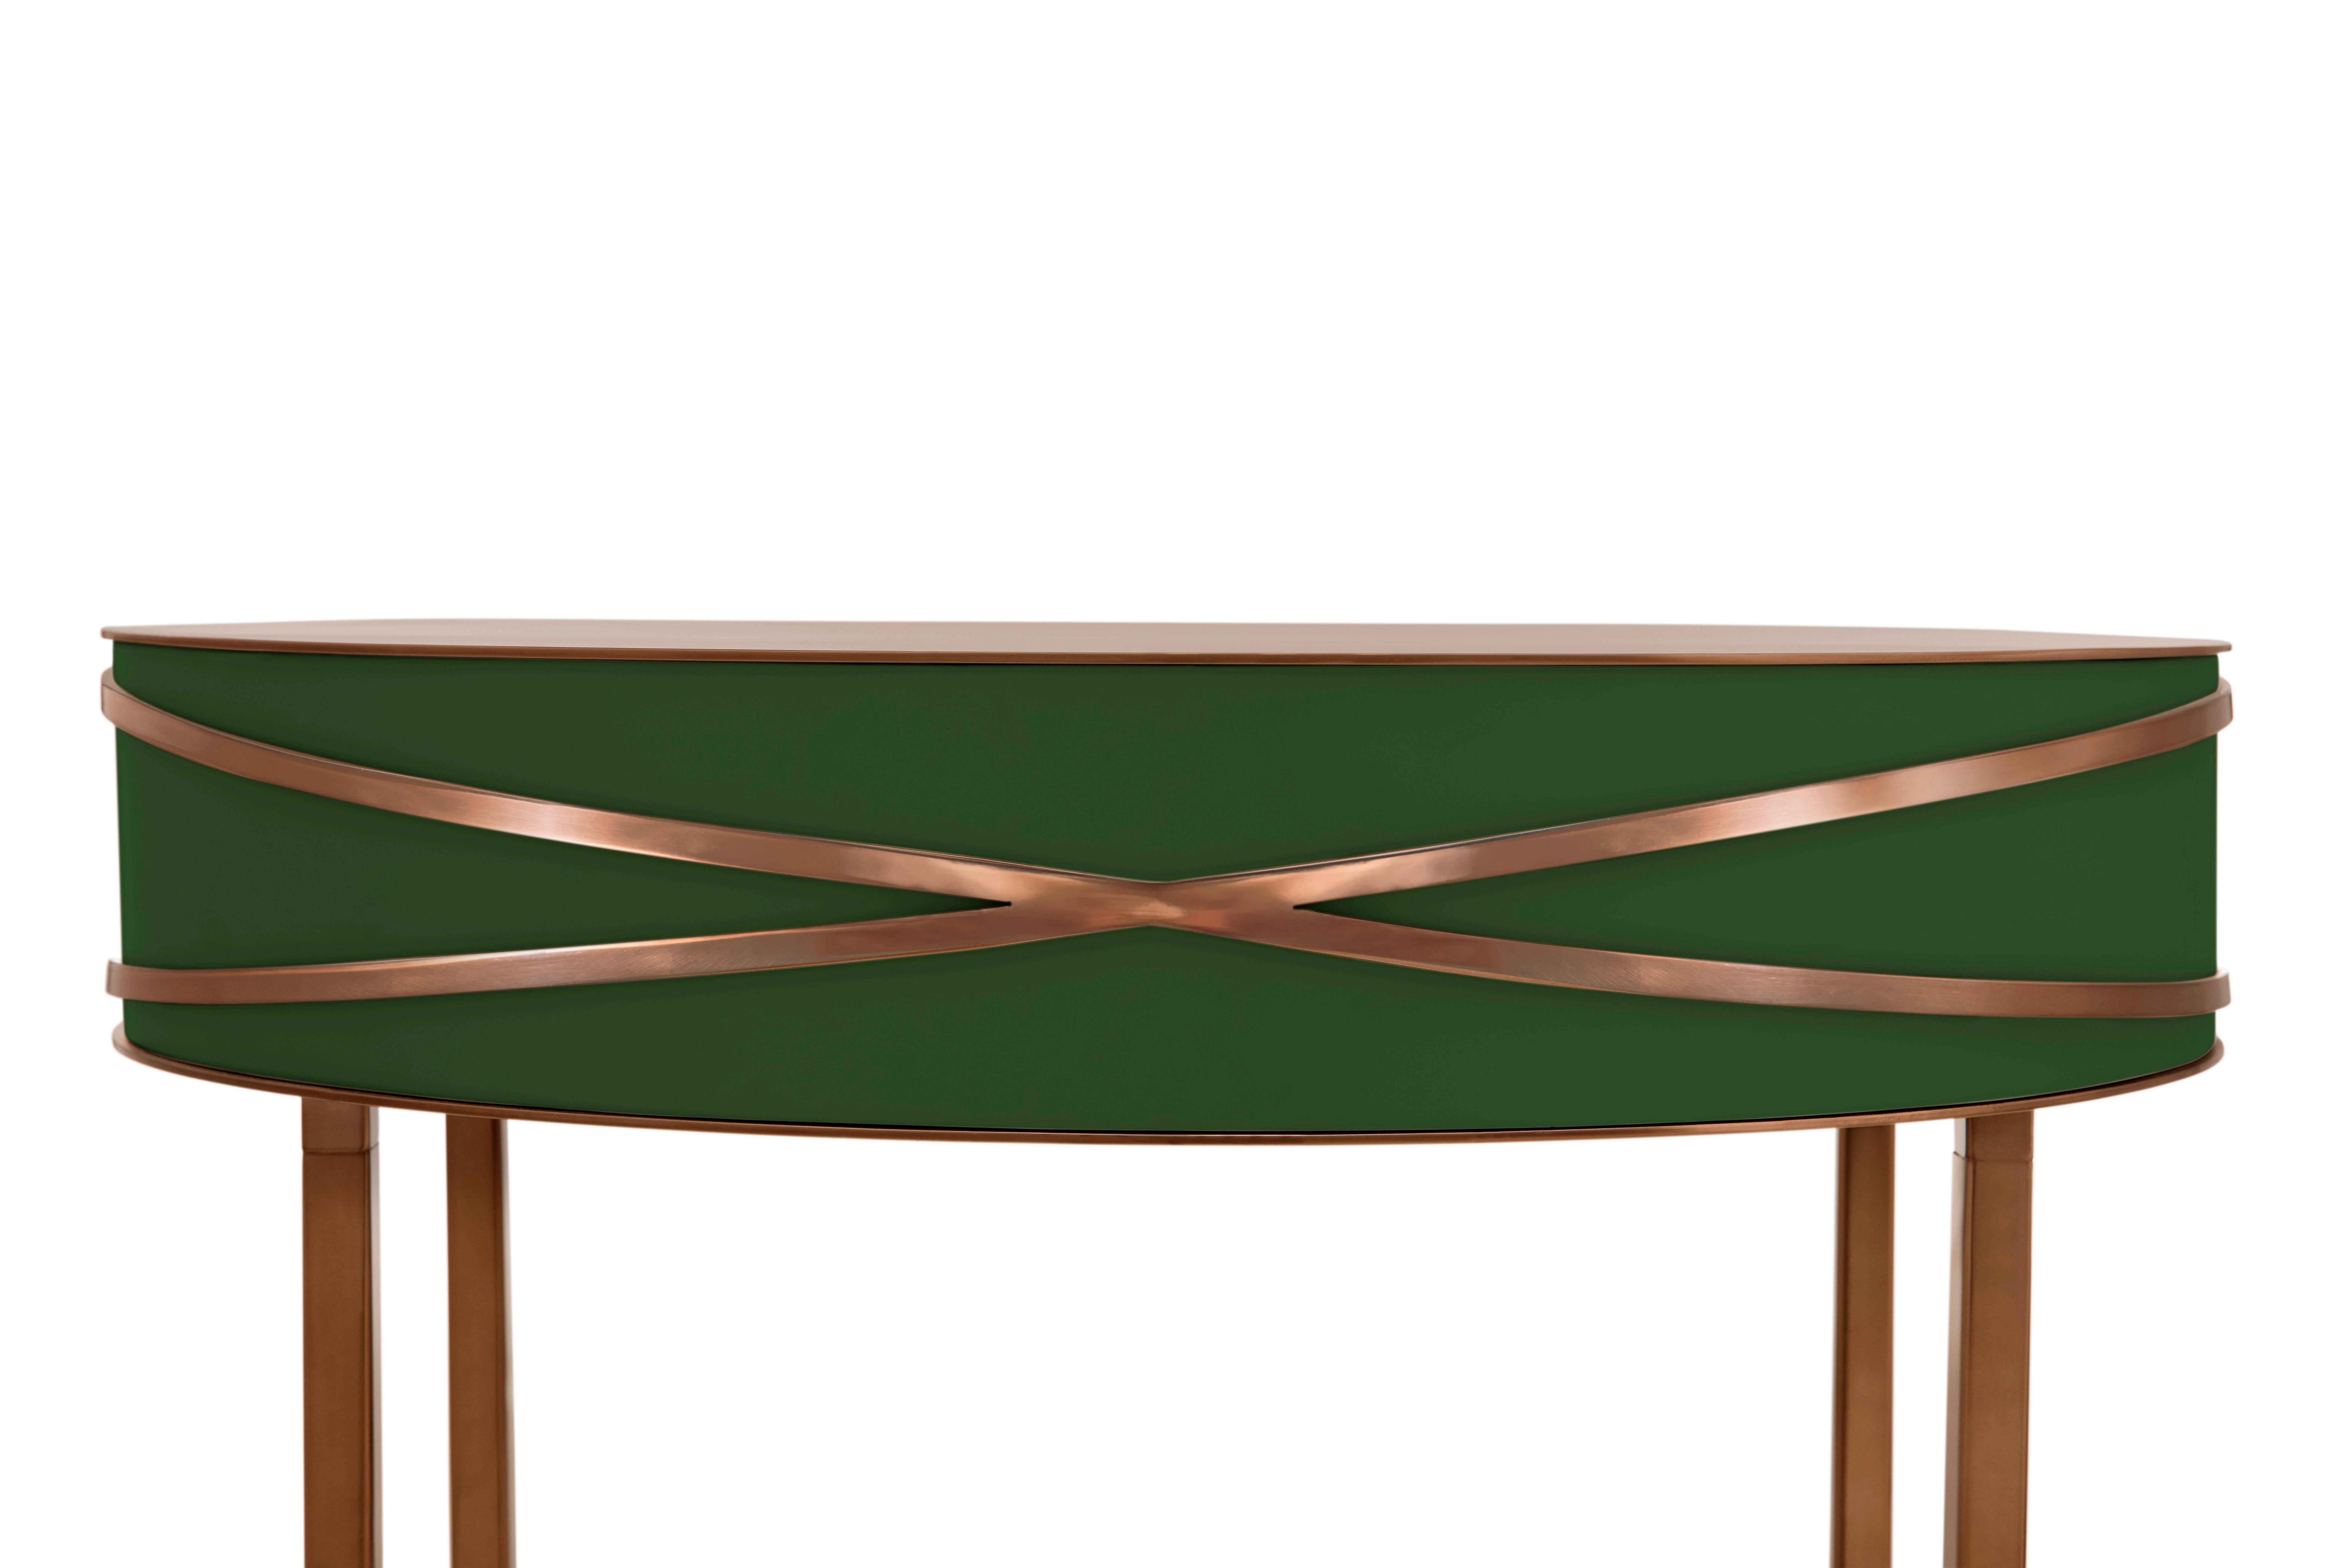 Stella Green Console or Bedside Table with Rose Gold Trims by Nika Zupanc is a deep green console table with a drawer, and metal trims in rose gold.

Nika Zupanc, a strikingly renowned Slovenian designer, never shies away from redefining the status